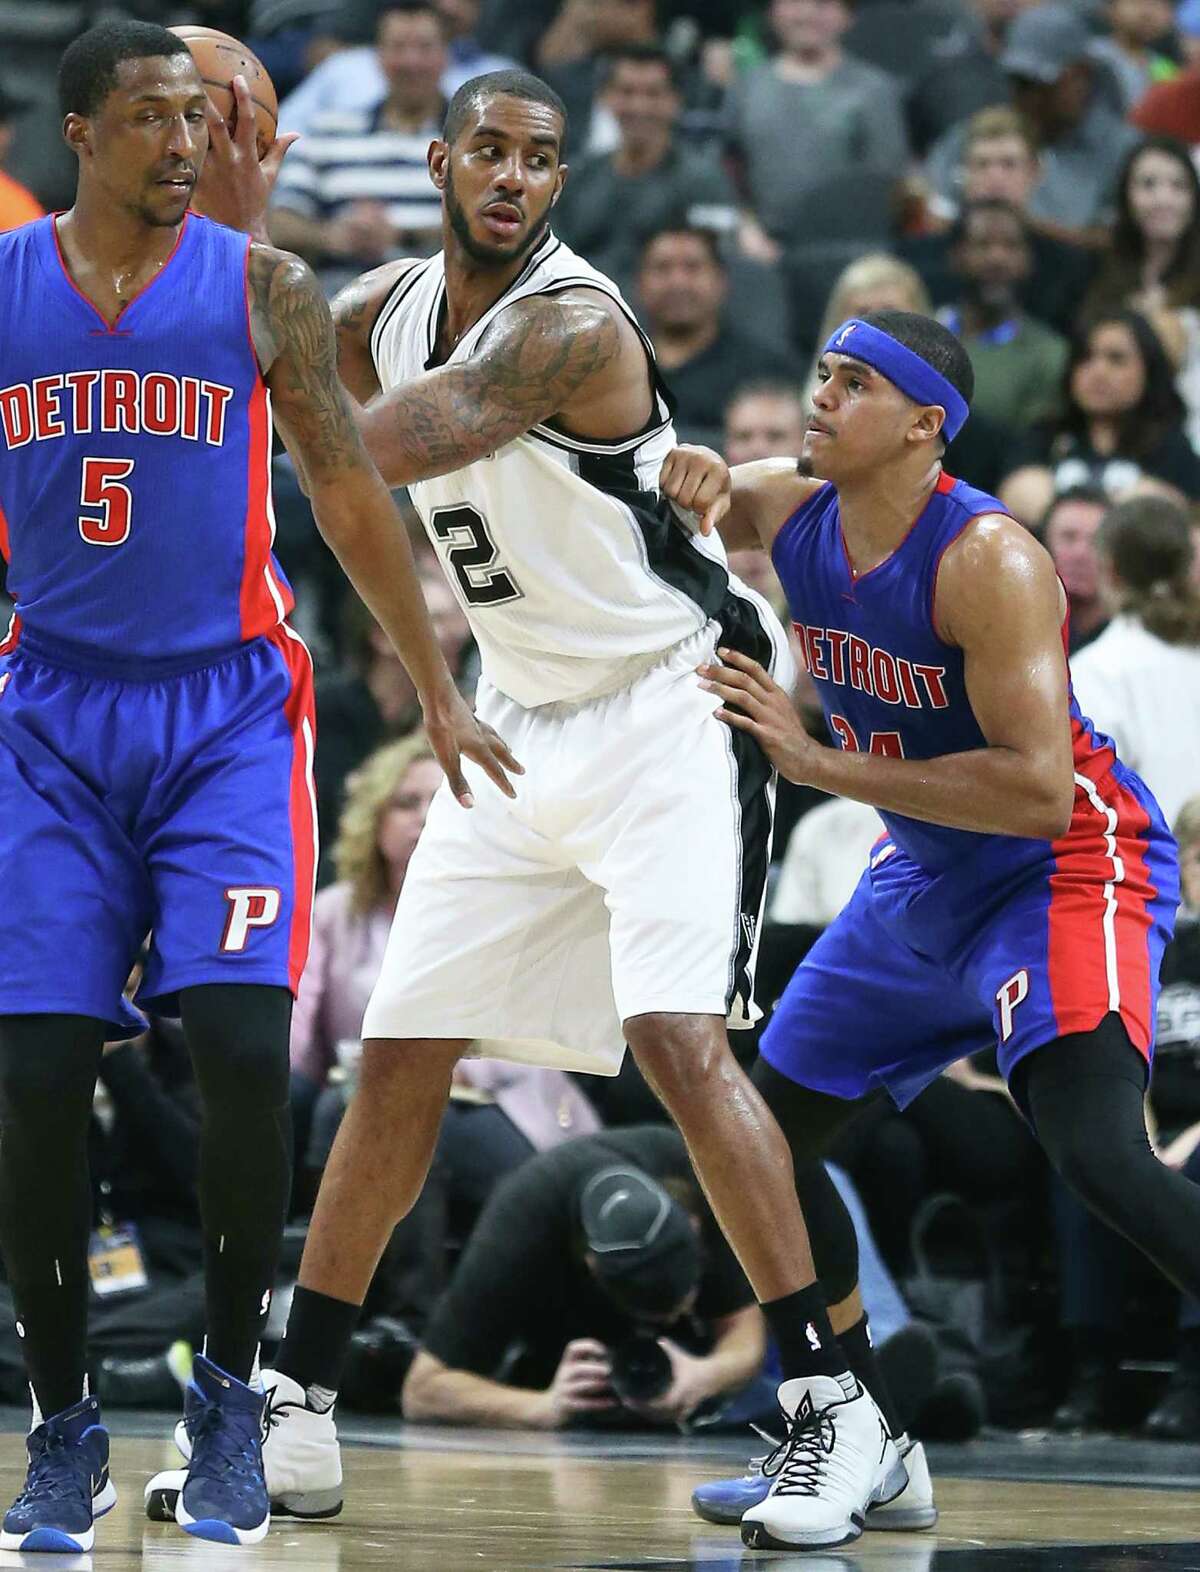 LaMarcus Aldridge posts on Tobias Harris as the Spurs host the Pistons at the AT&T Center on March 2, 2016.